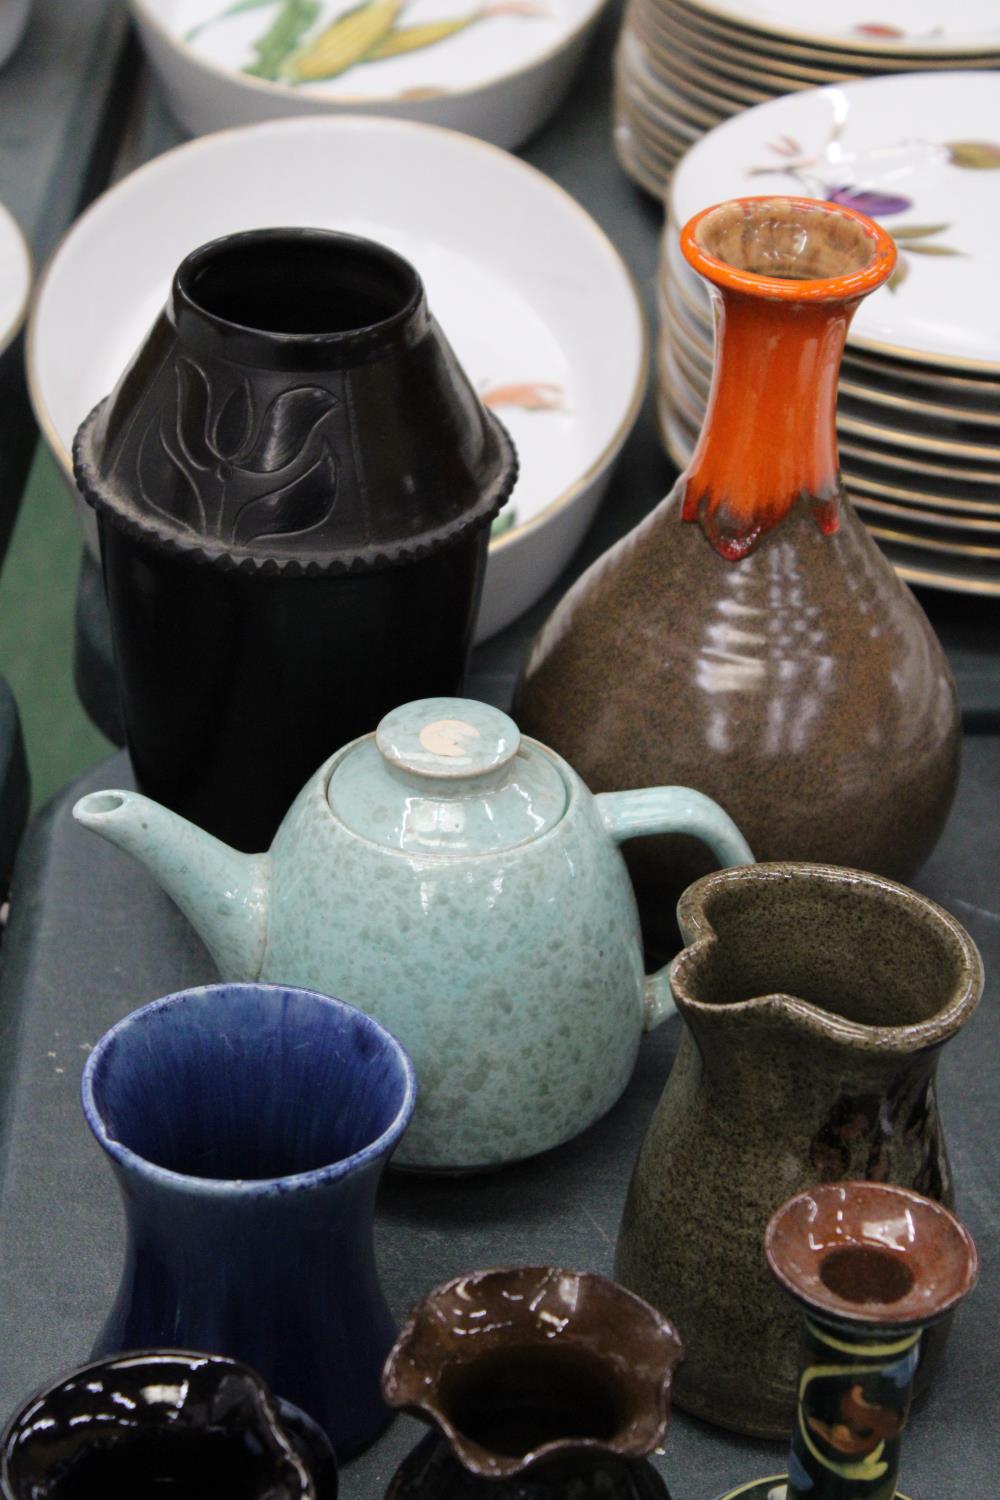 A QUANTITY OF STUDIO POTTERY TO INCLUDE A TEAPOT, CANDLE HOLDER, BOWLS ETC - SOME WITH MARKS TO - Image 2 of 6